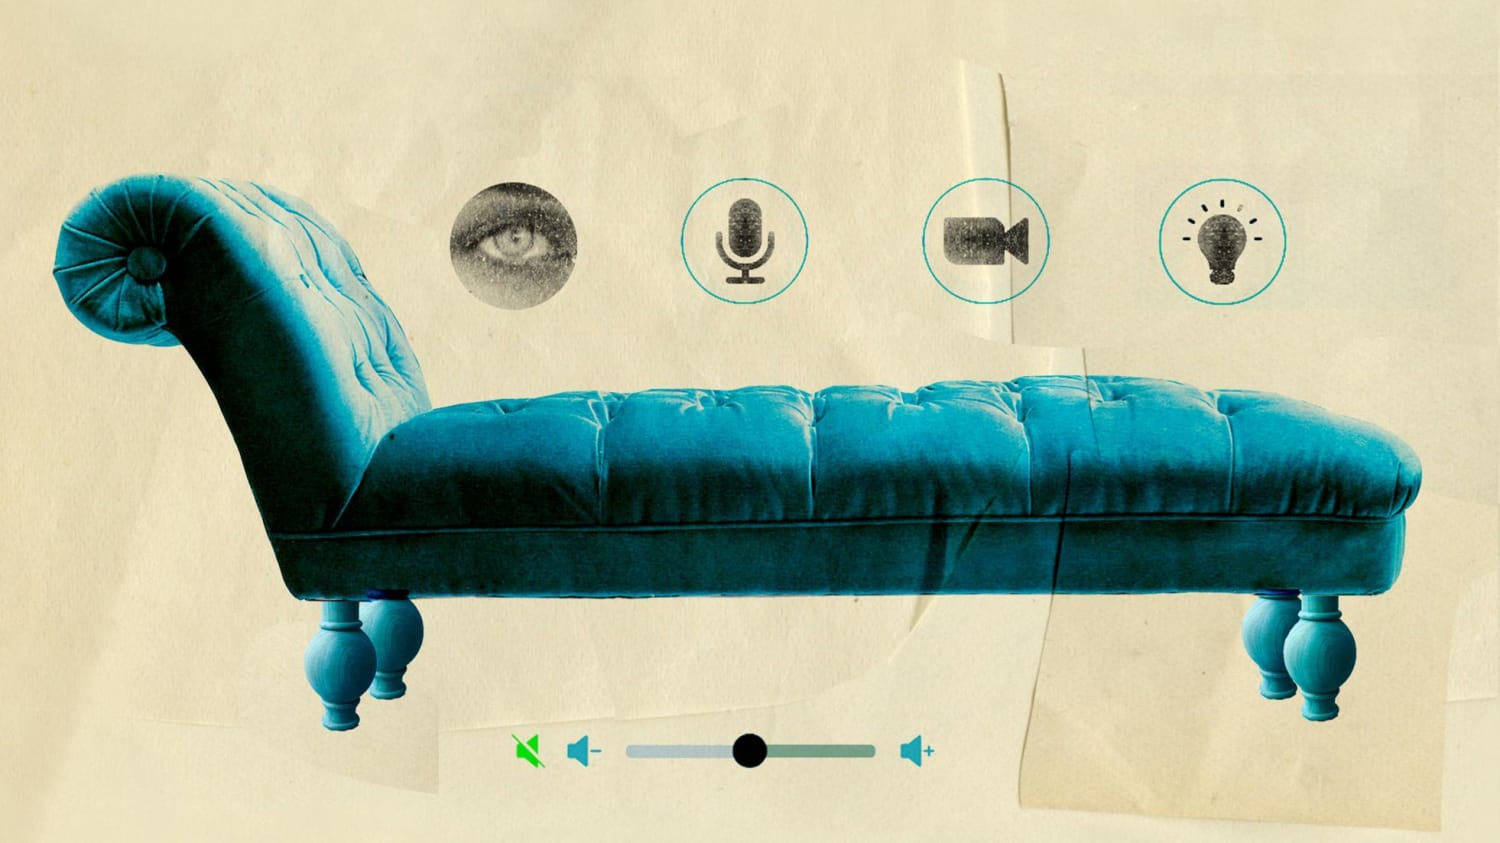 The virtual couch